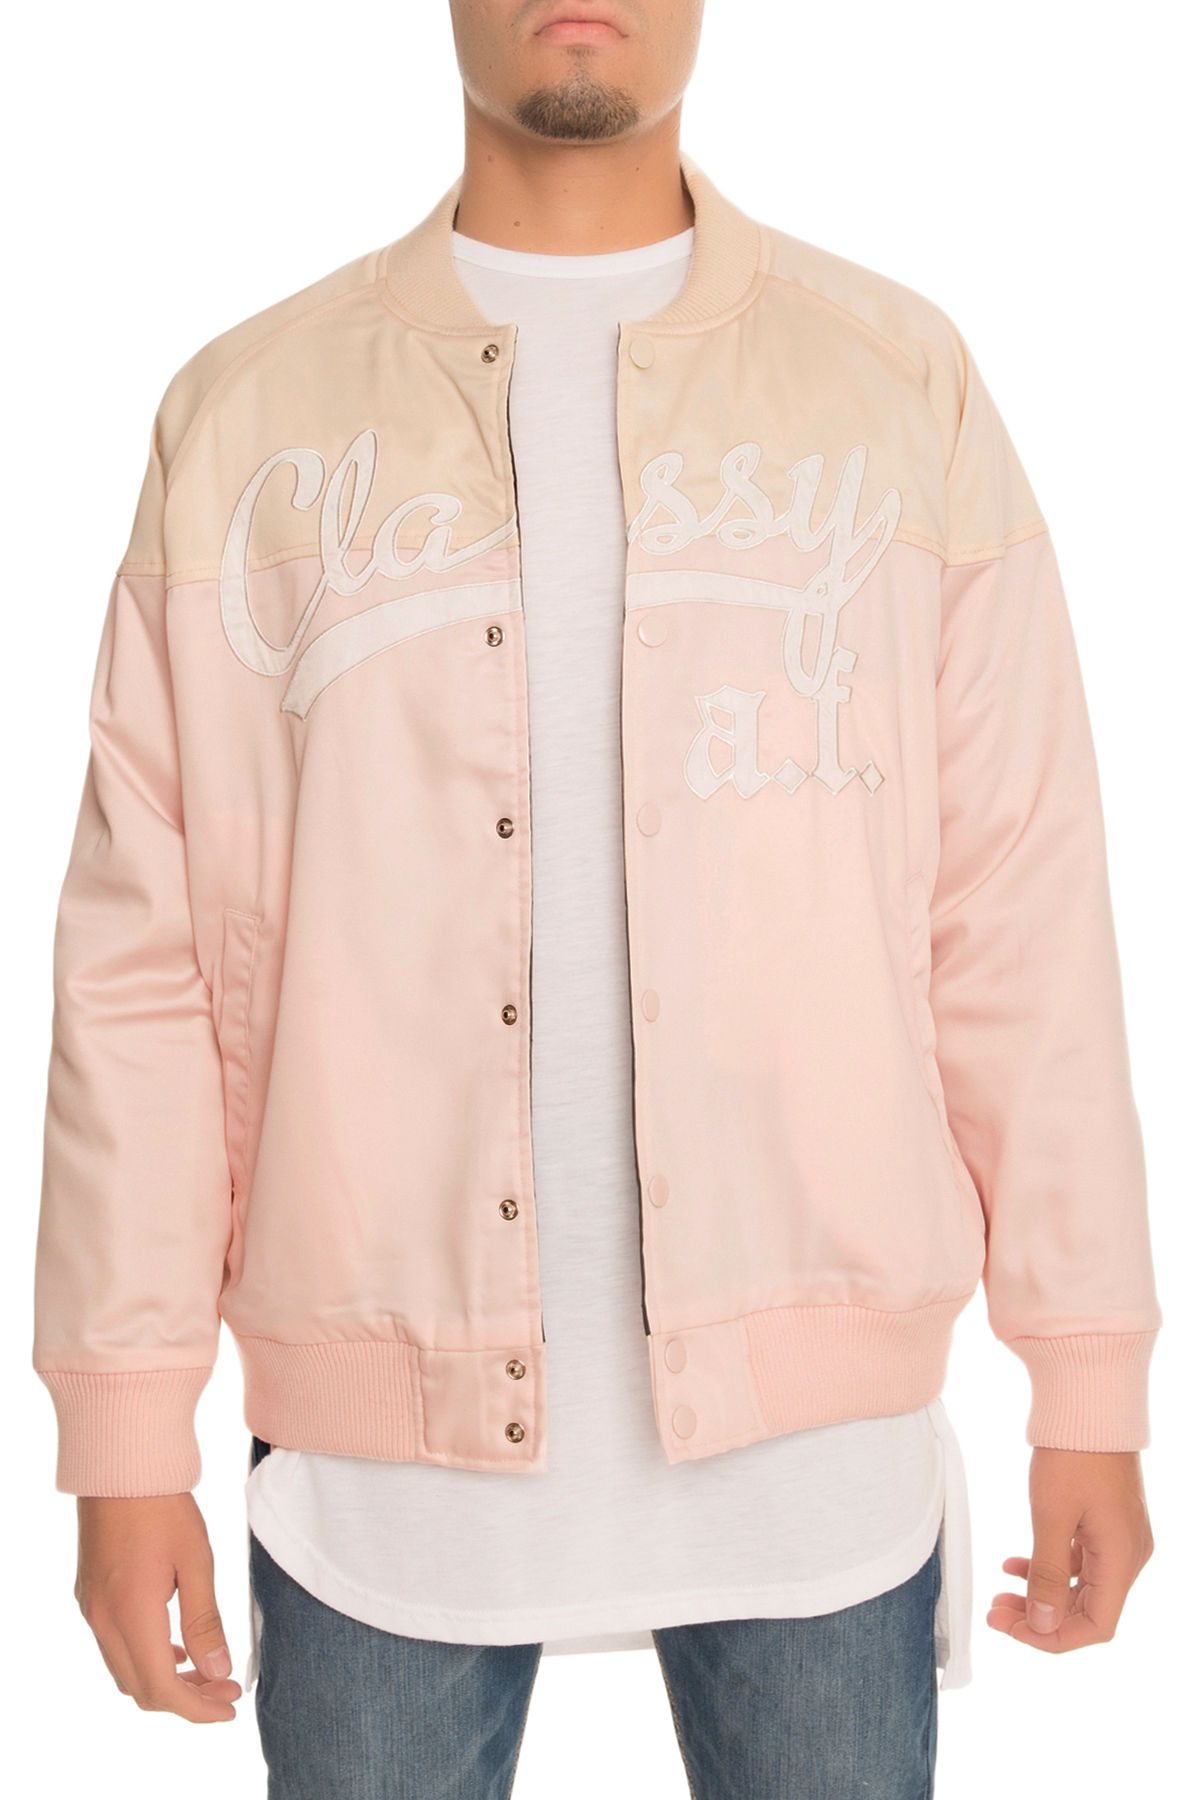 CLASSY BRAND The Classy A.F. Two Tone Baseball Jacket in Lt Pink and ...